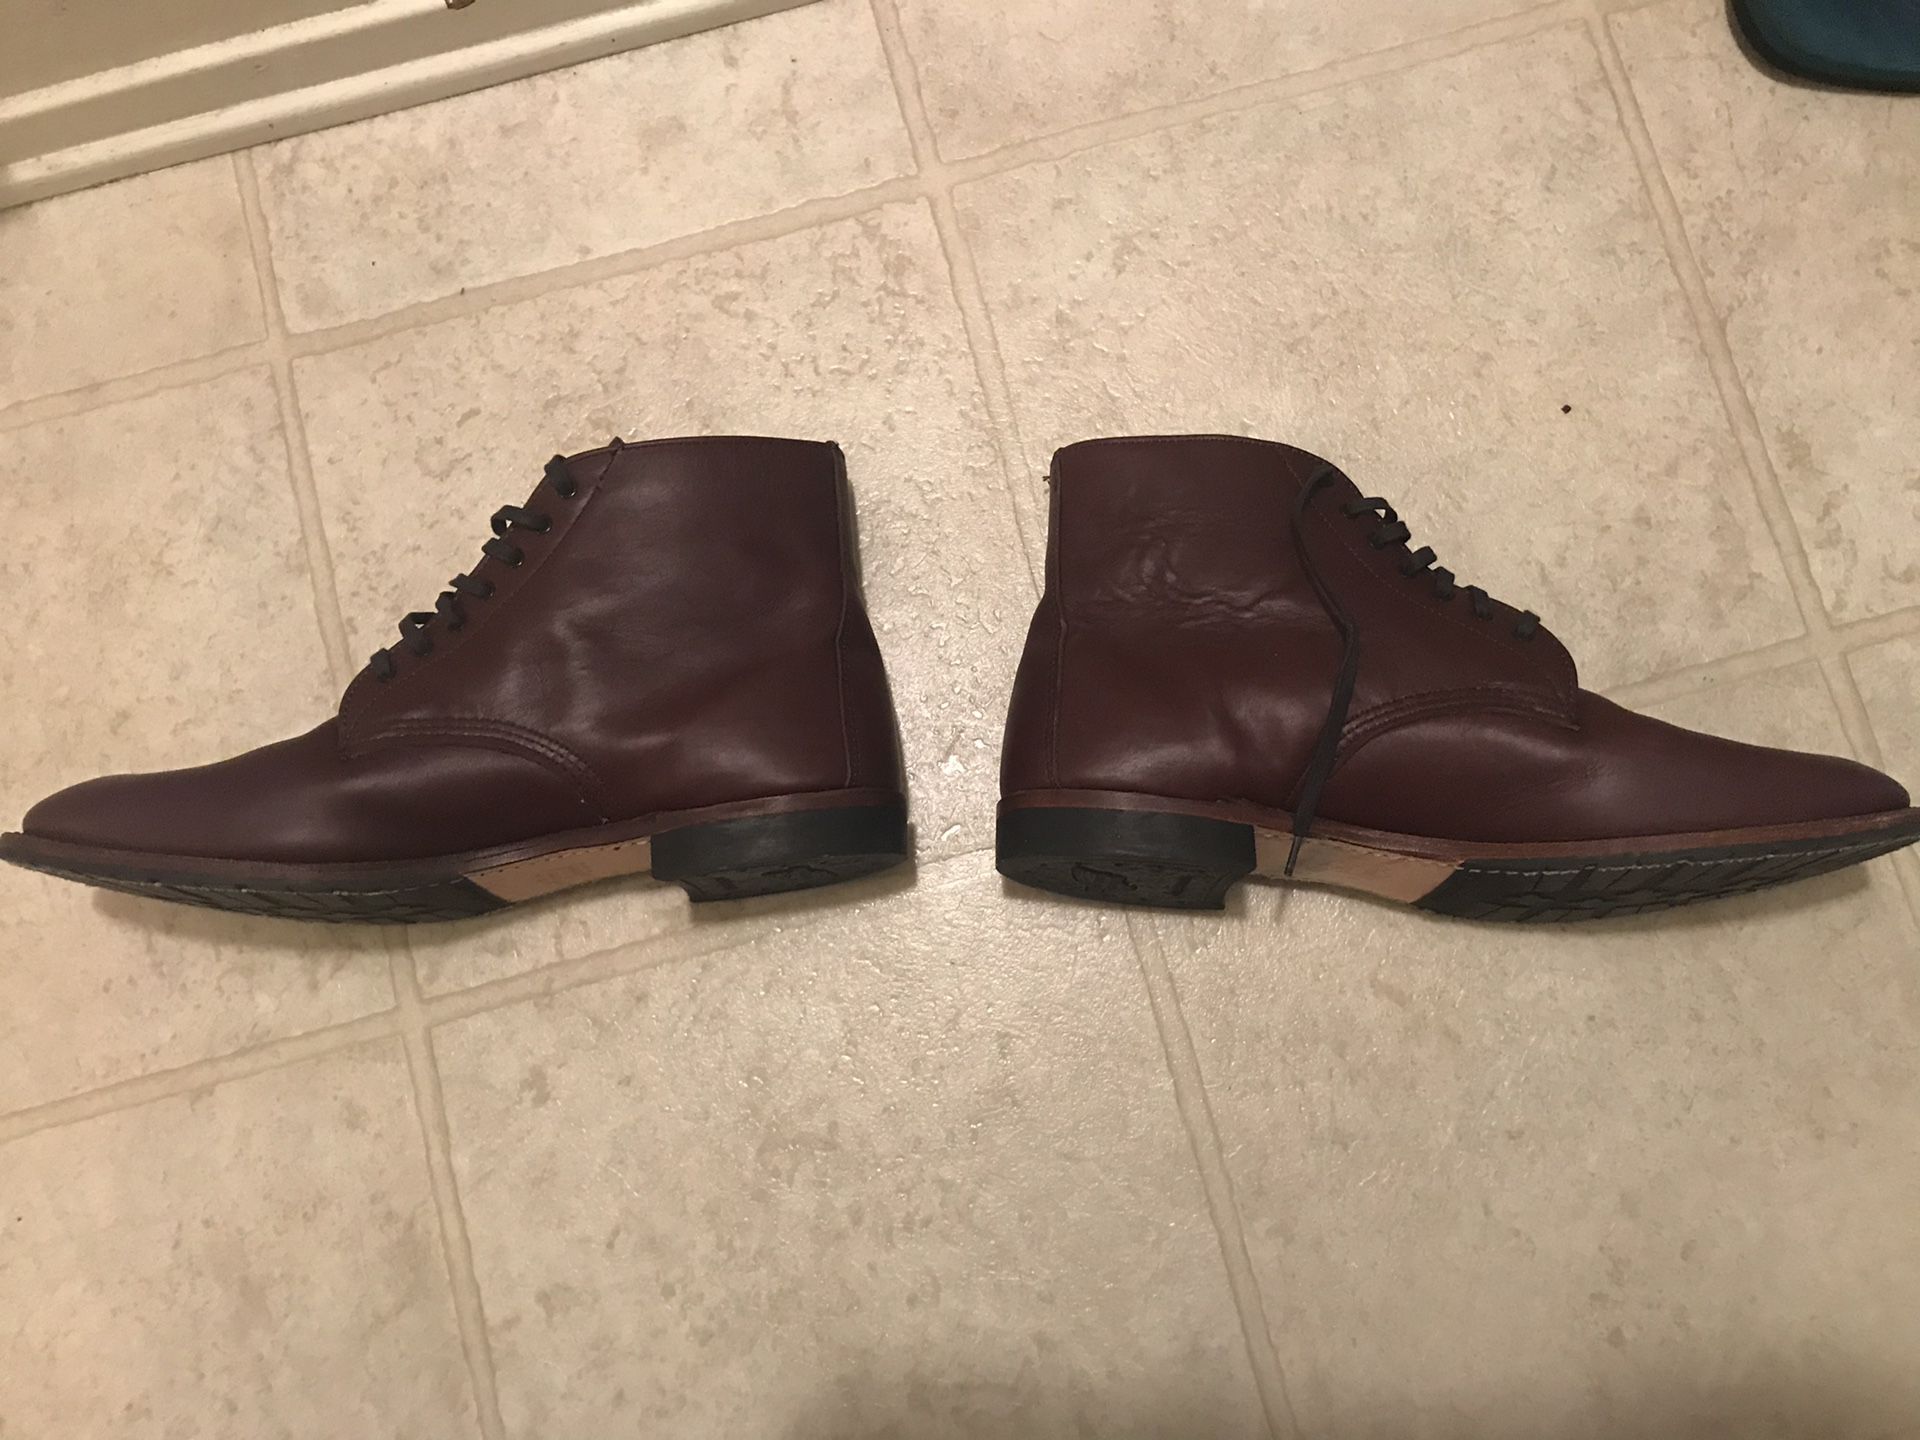 Redwing 9072 Sheldon heritage boots 13D black cherry feather stone red wing for Sale in Ontario, CA OfferUp